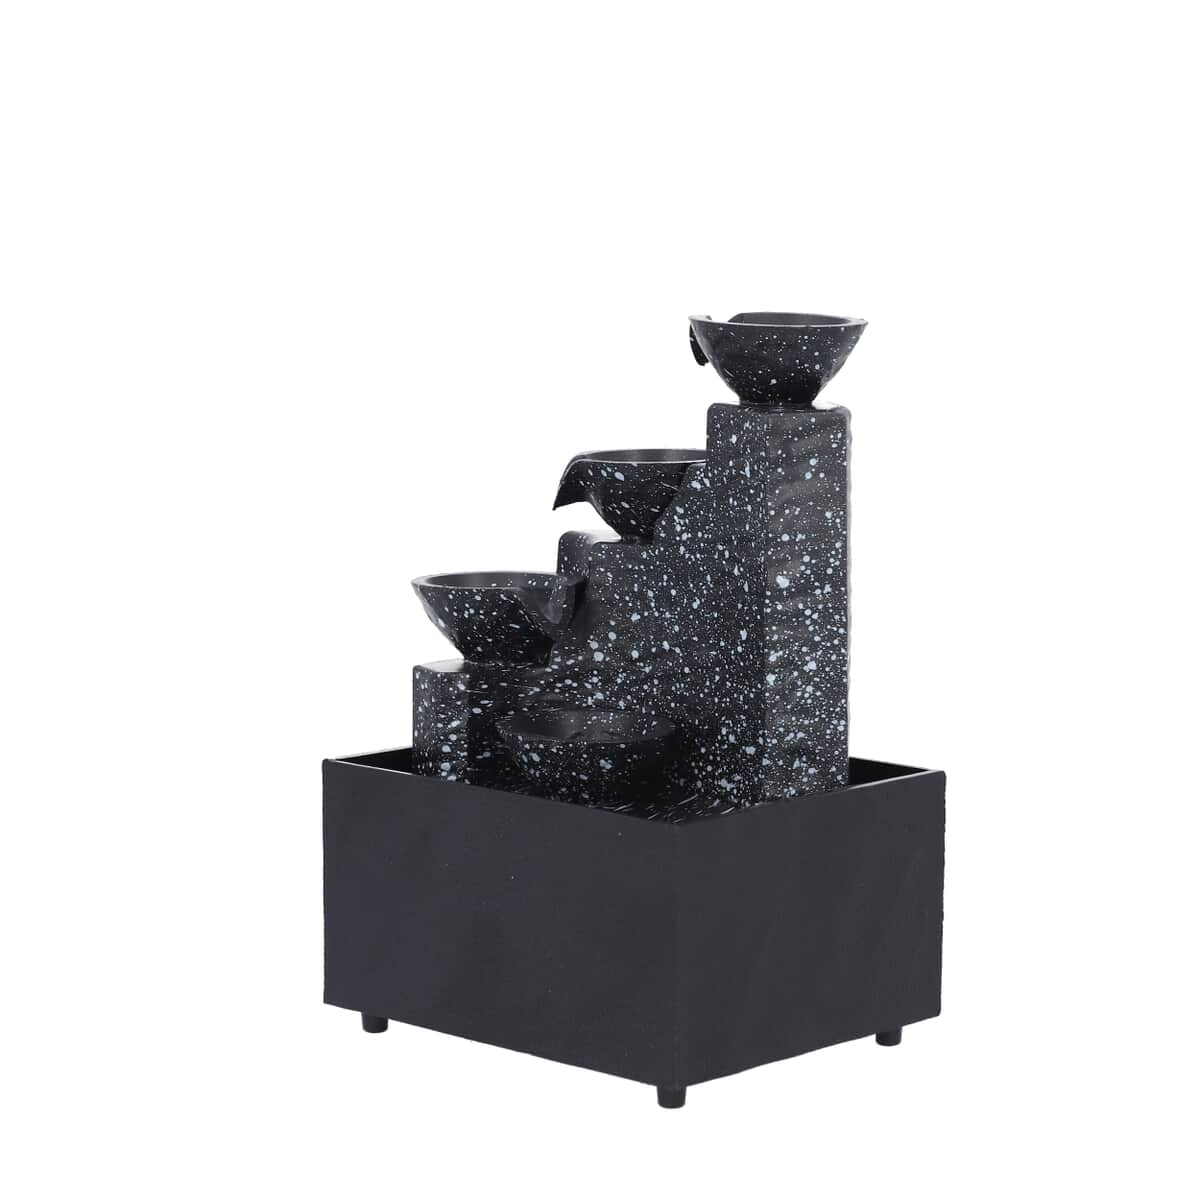 Black Mini Four Liquor Cups Water Fountain with LED Light, Battery Operated 3 Tier Table Top Indoor Outdoor Showpiece Fountain for Living Room Table Decor Bedroom Office - Water Circulation (2xAA Battery Not Included) image number 1